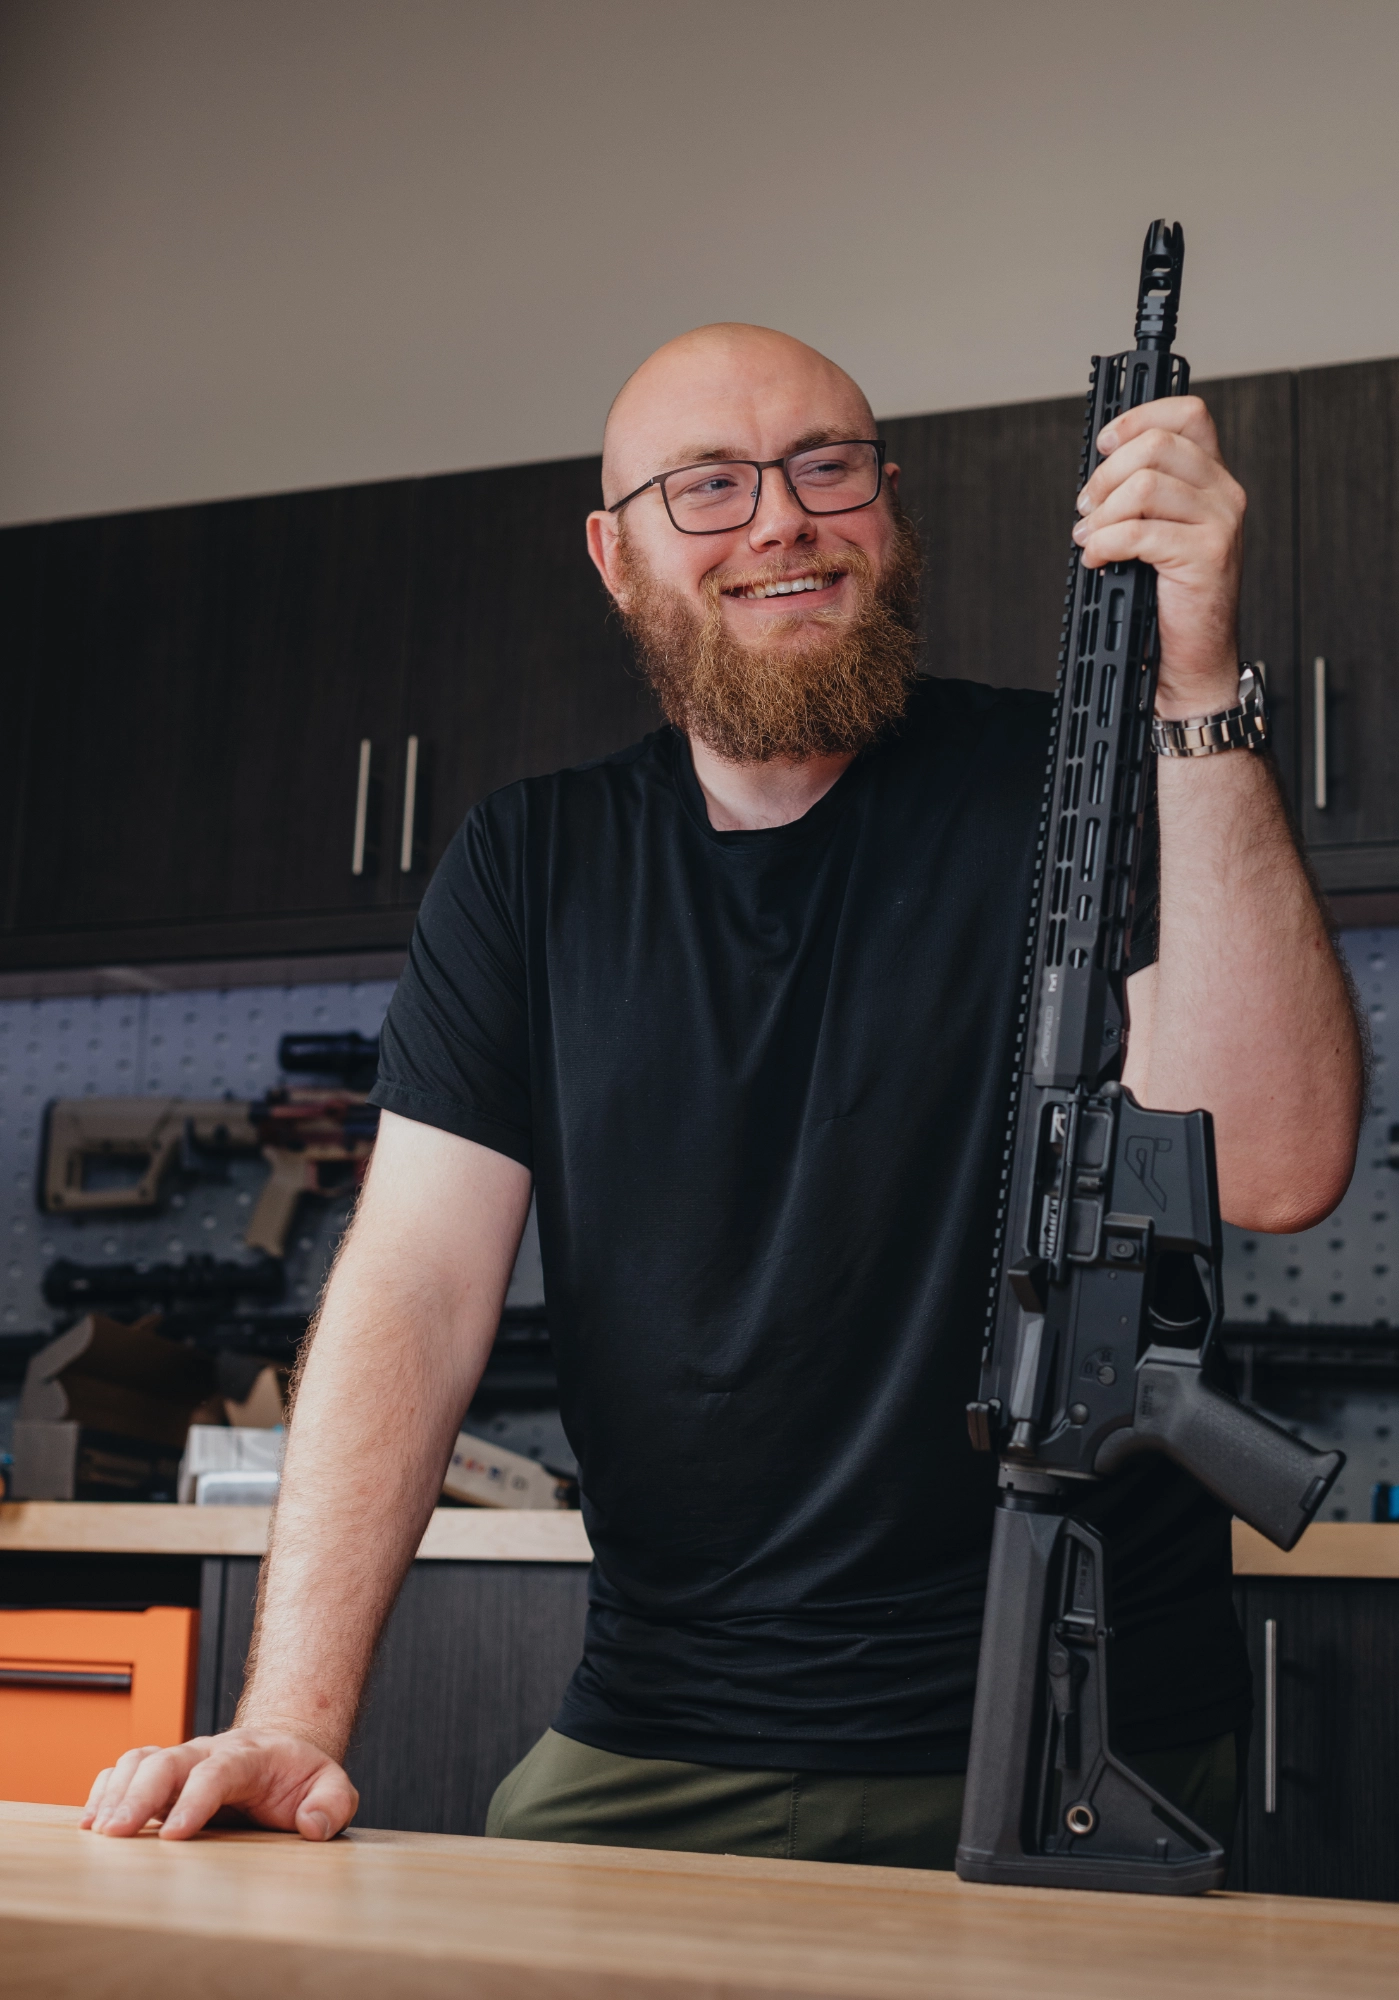 Kirk completing his ar15 build